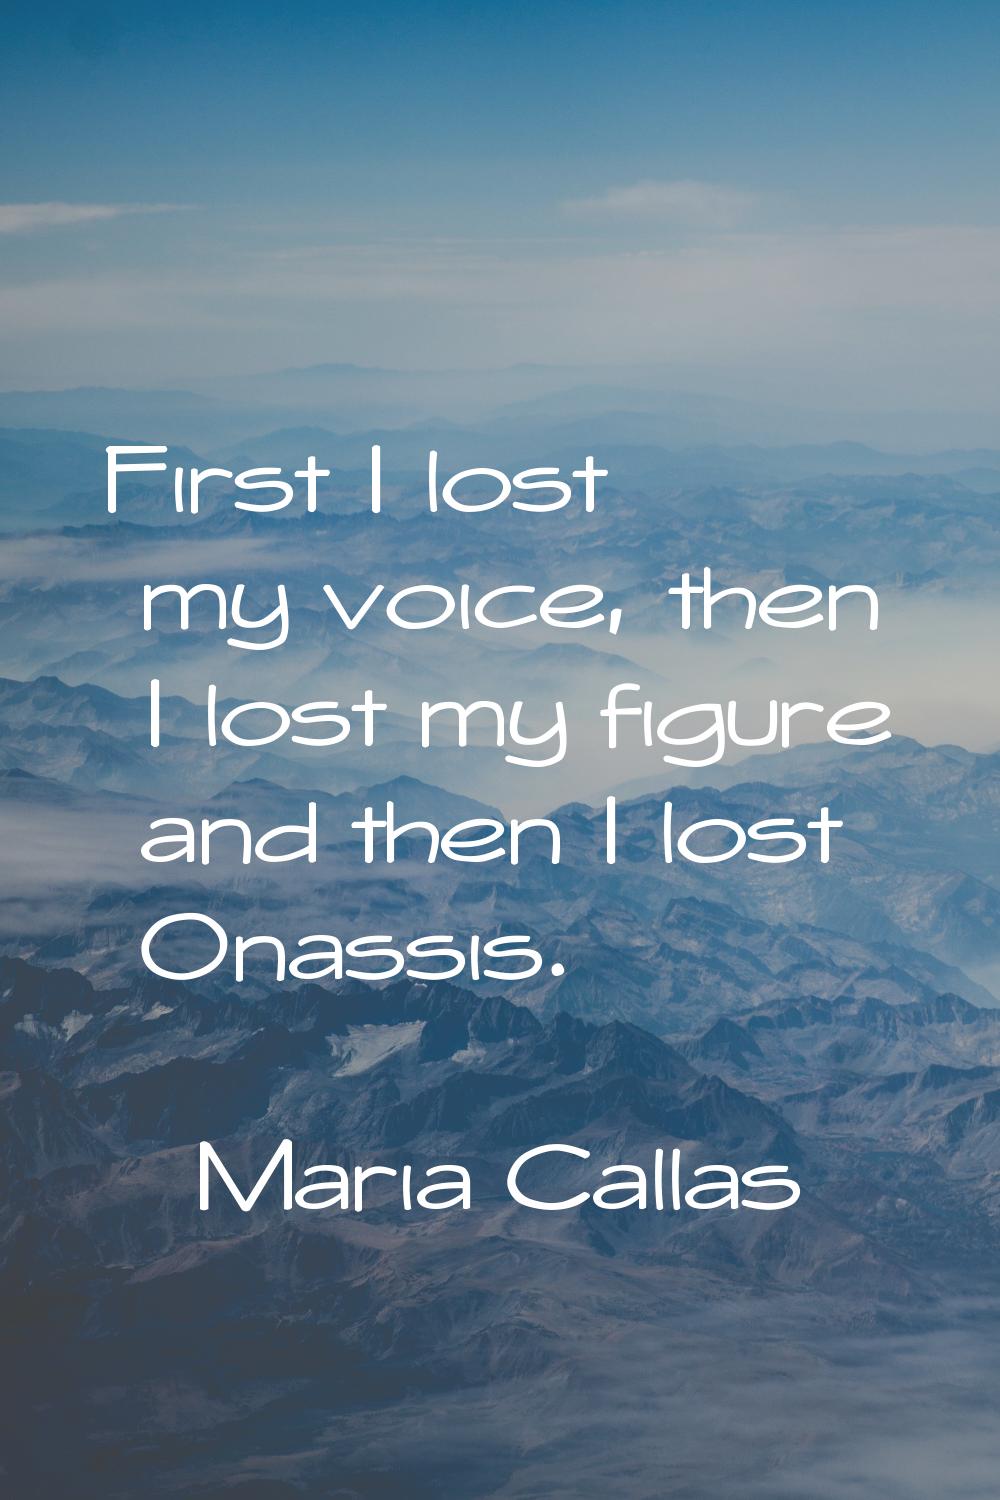 First I lost my voice, then I lost my figure and then I lost Onassis.